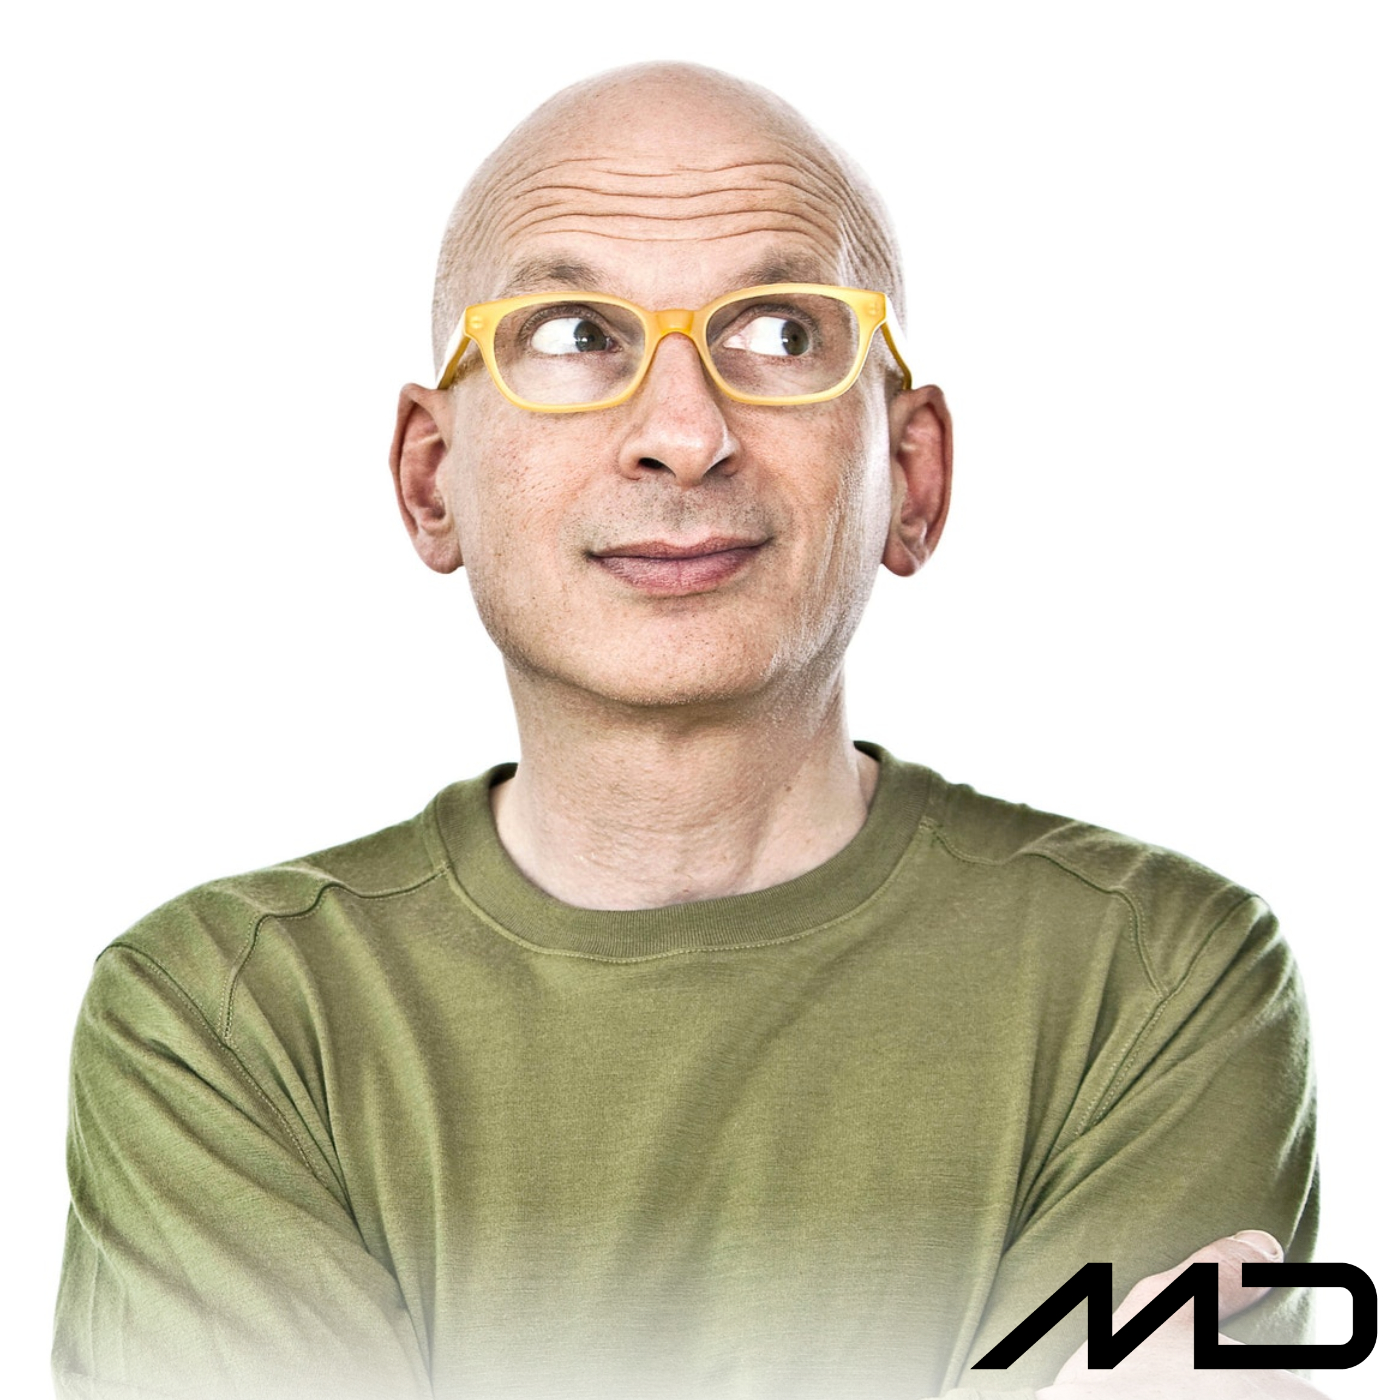 How Marketing is Changing... with Seth Godin